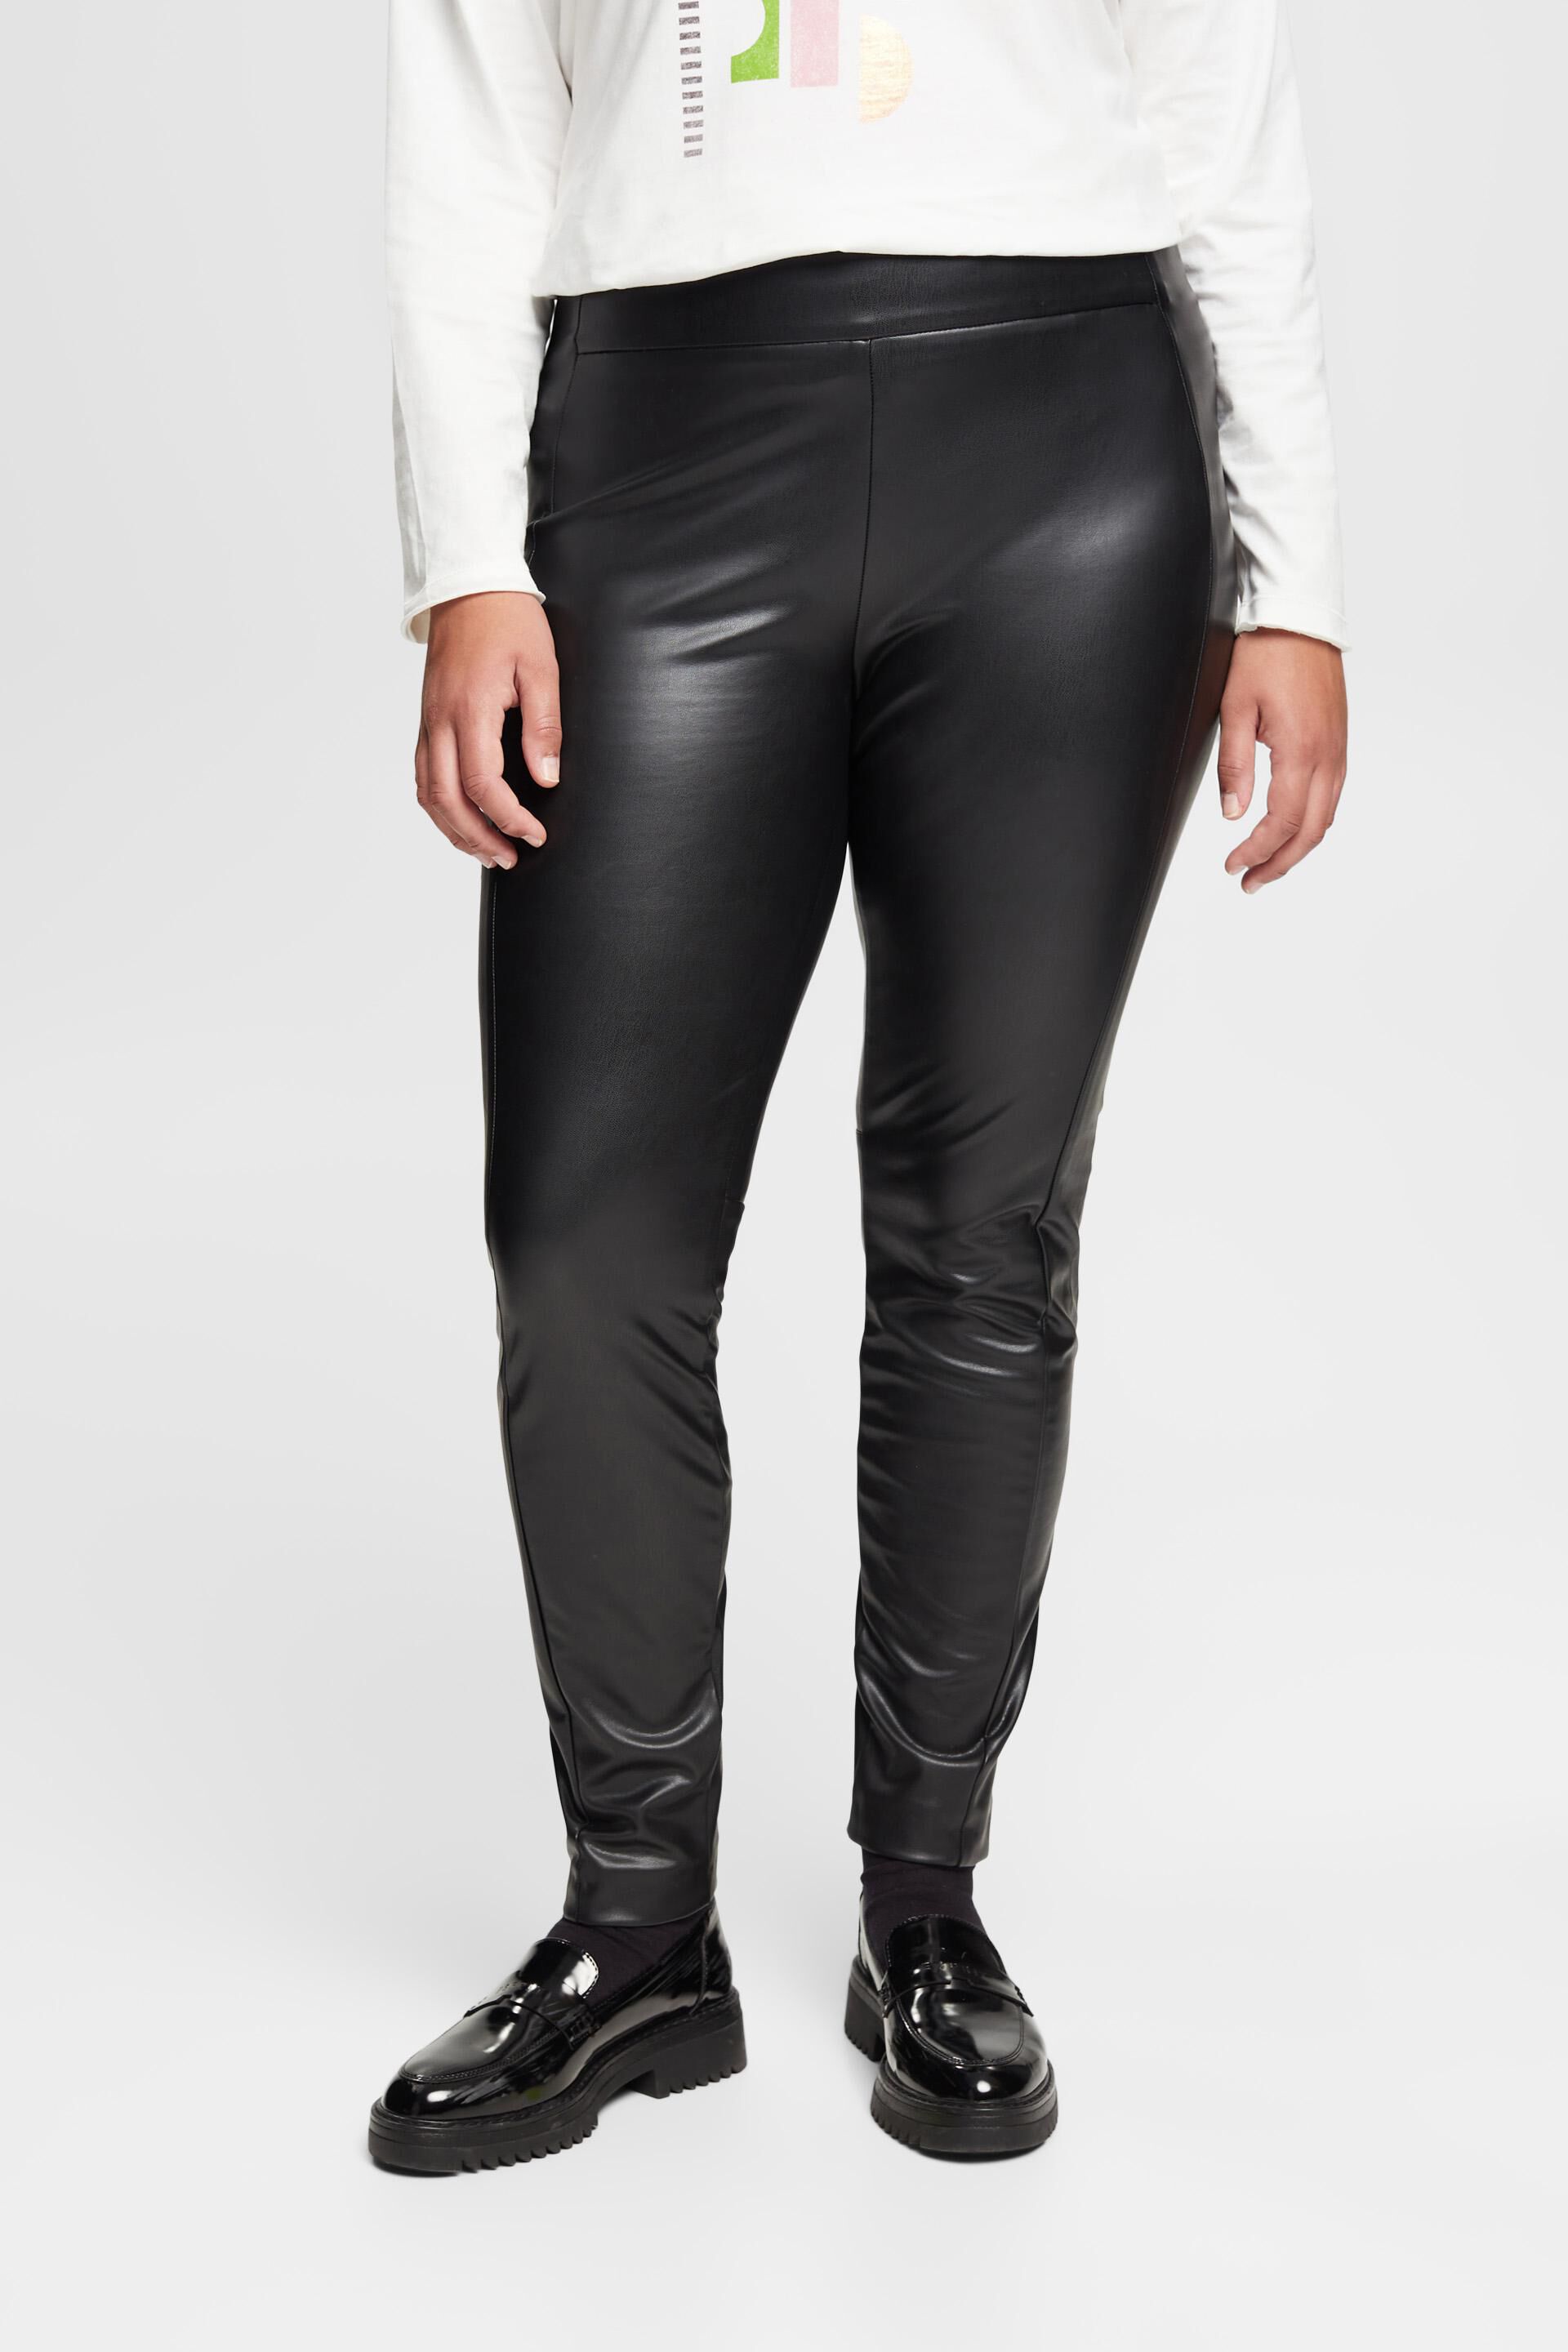 Black Leather Pants for Womens Cropped Leather Pants Lace Up Patent Leather  Pants Leather Pants for Women Online Red and White Leather Pants  Inexpensive Leather Pants at Amazon Women's Clothing store